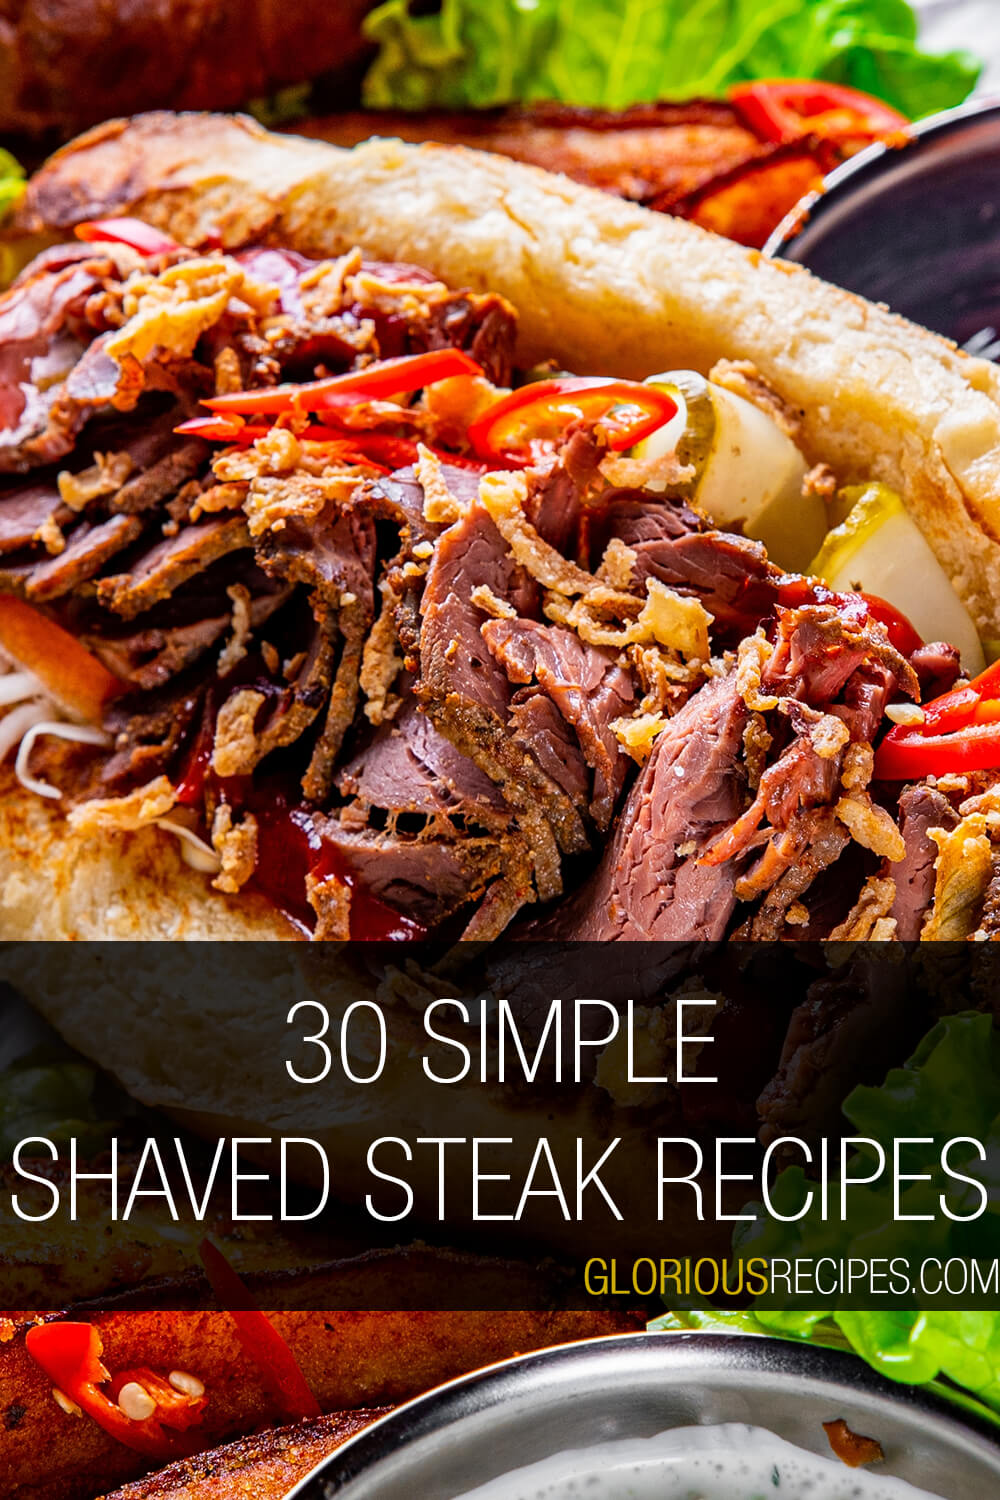 30 Simple Shaved Steak Recipes To Try 